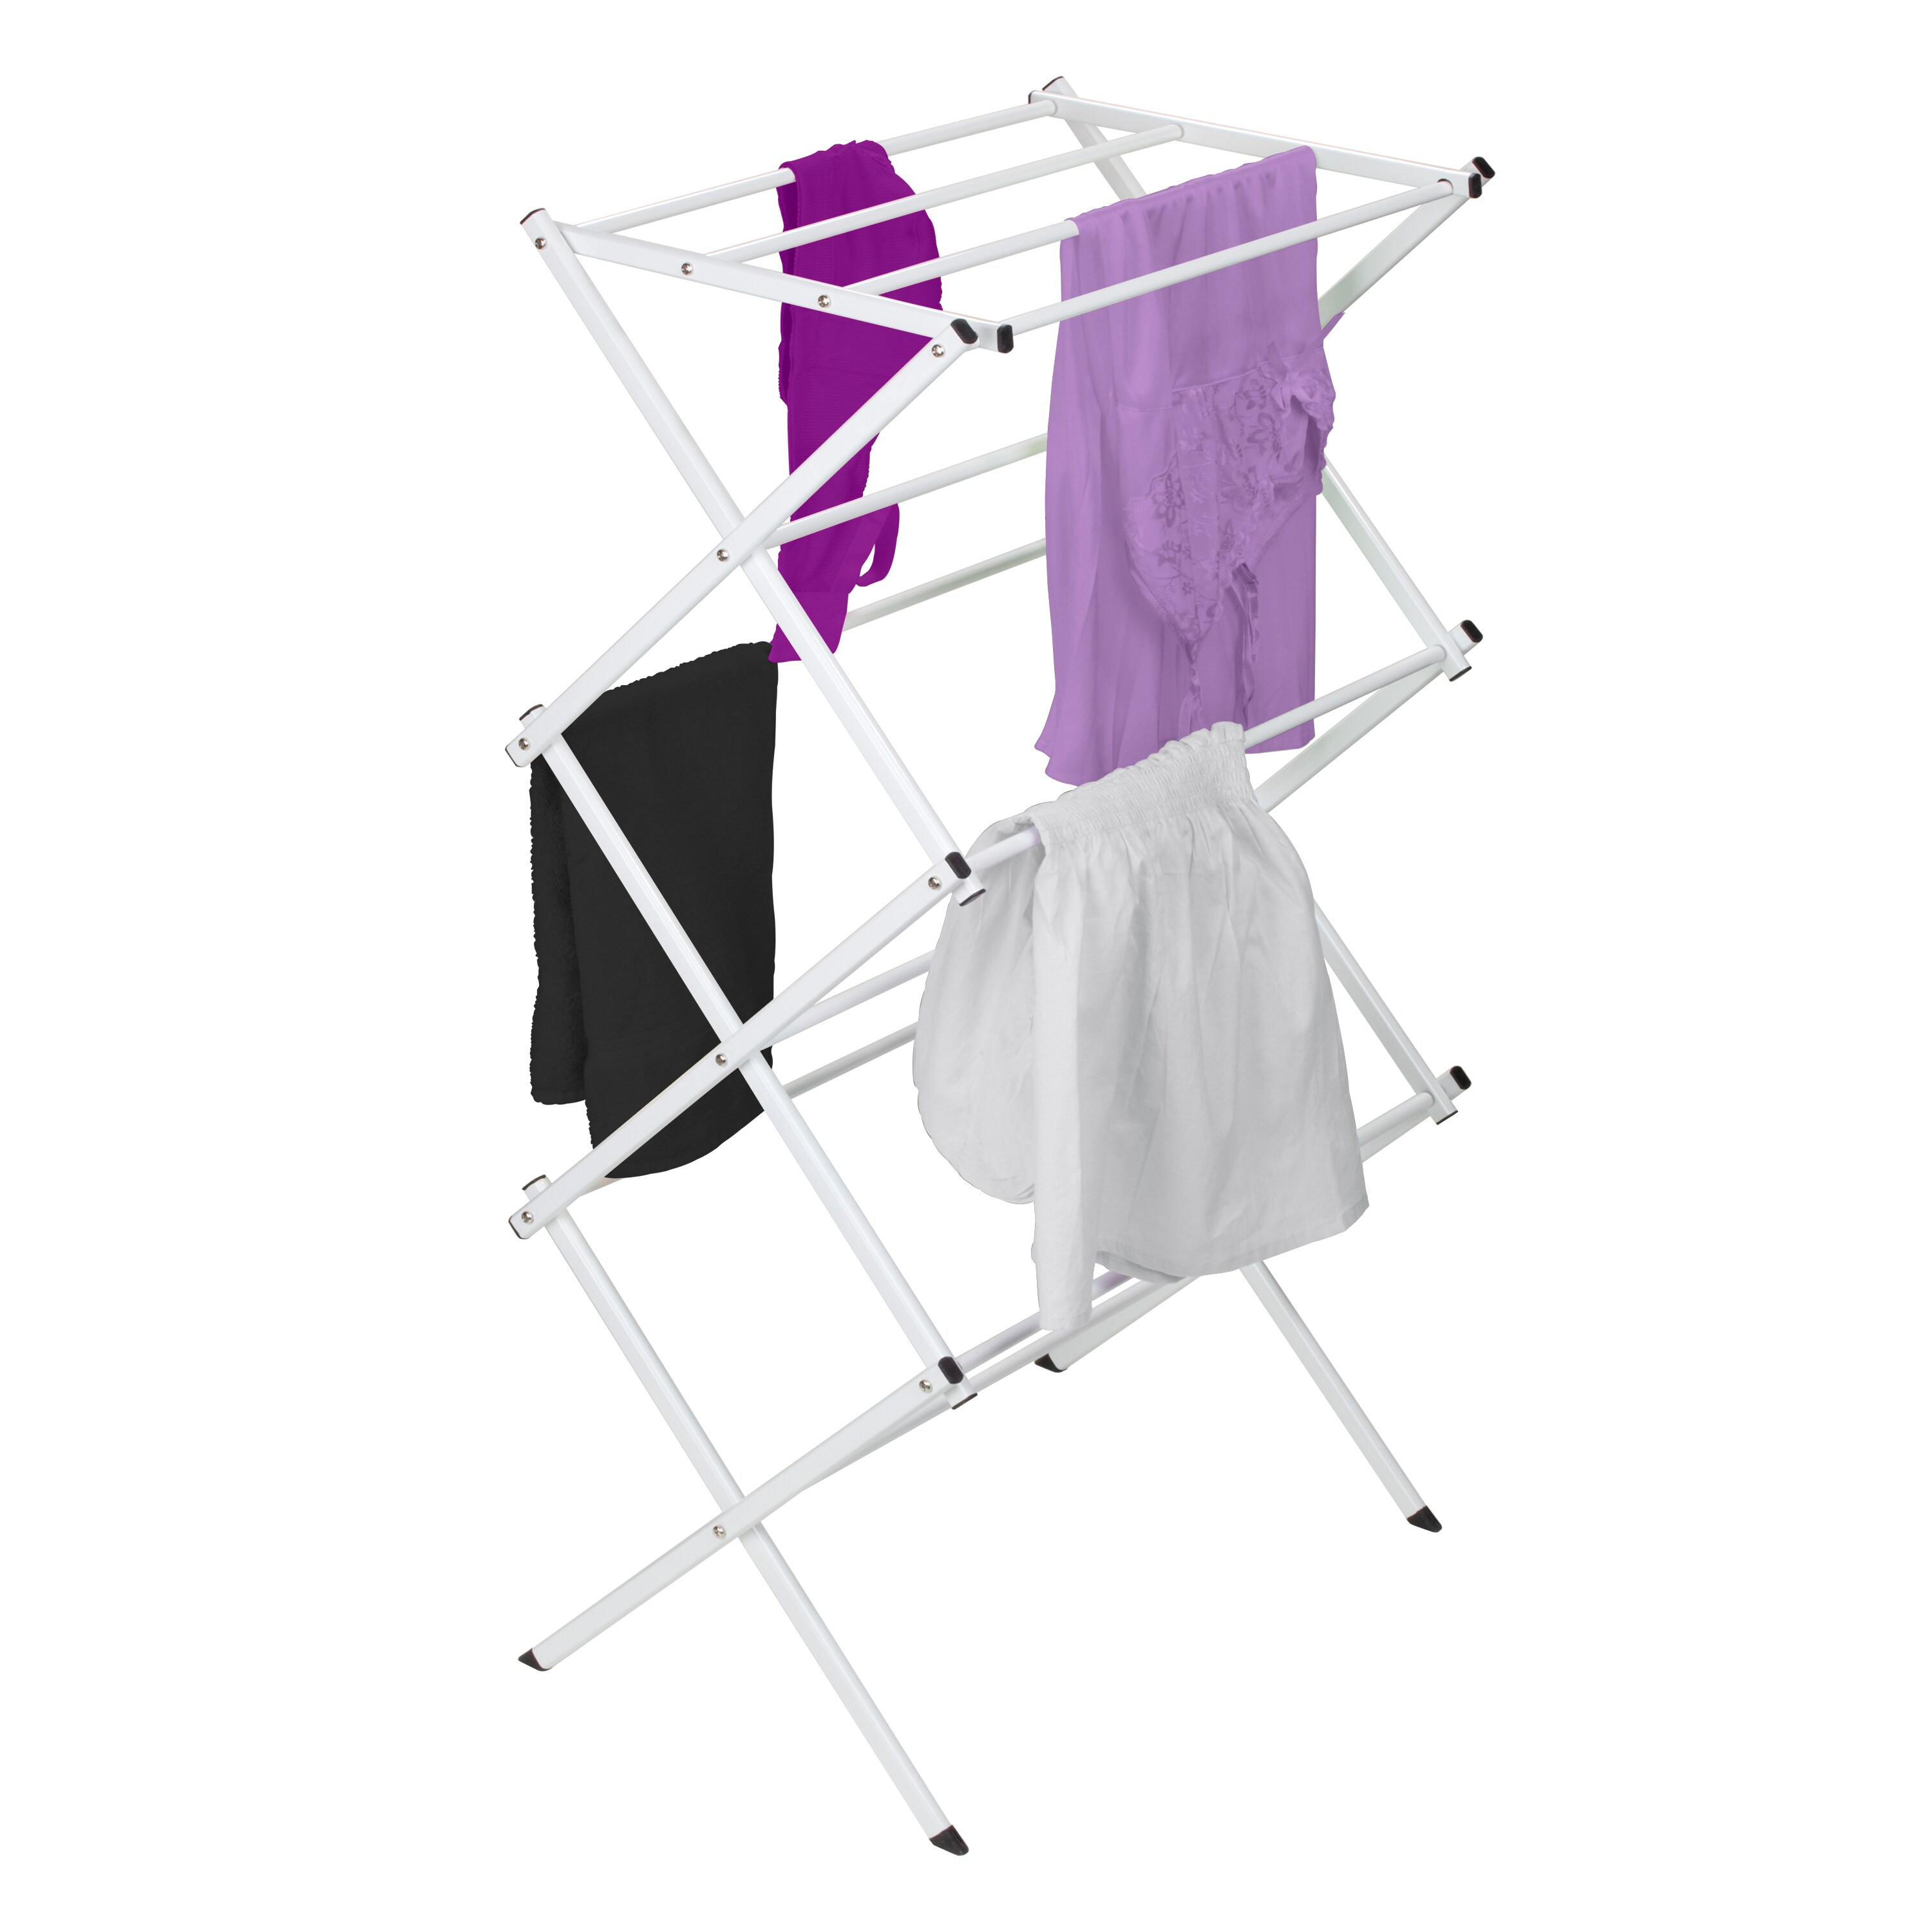 Woolite 24 Wide Collapsible Wall-Mount Drying Rack - White